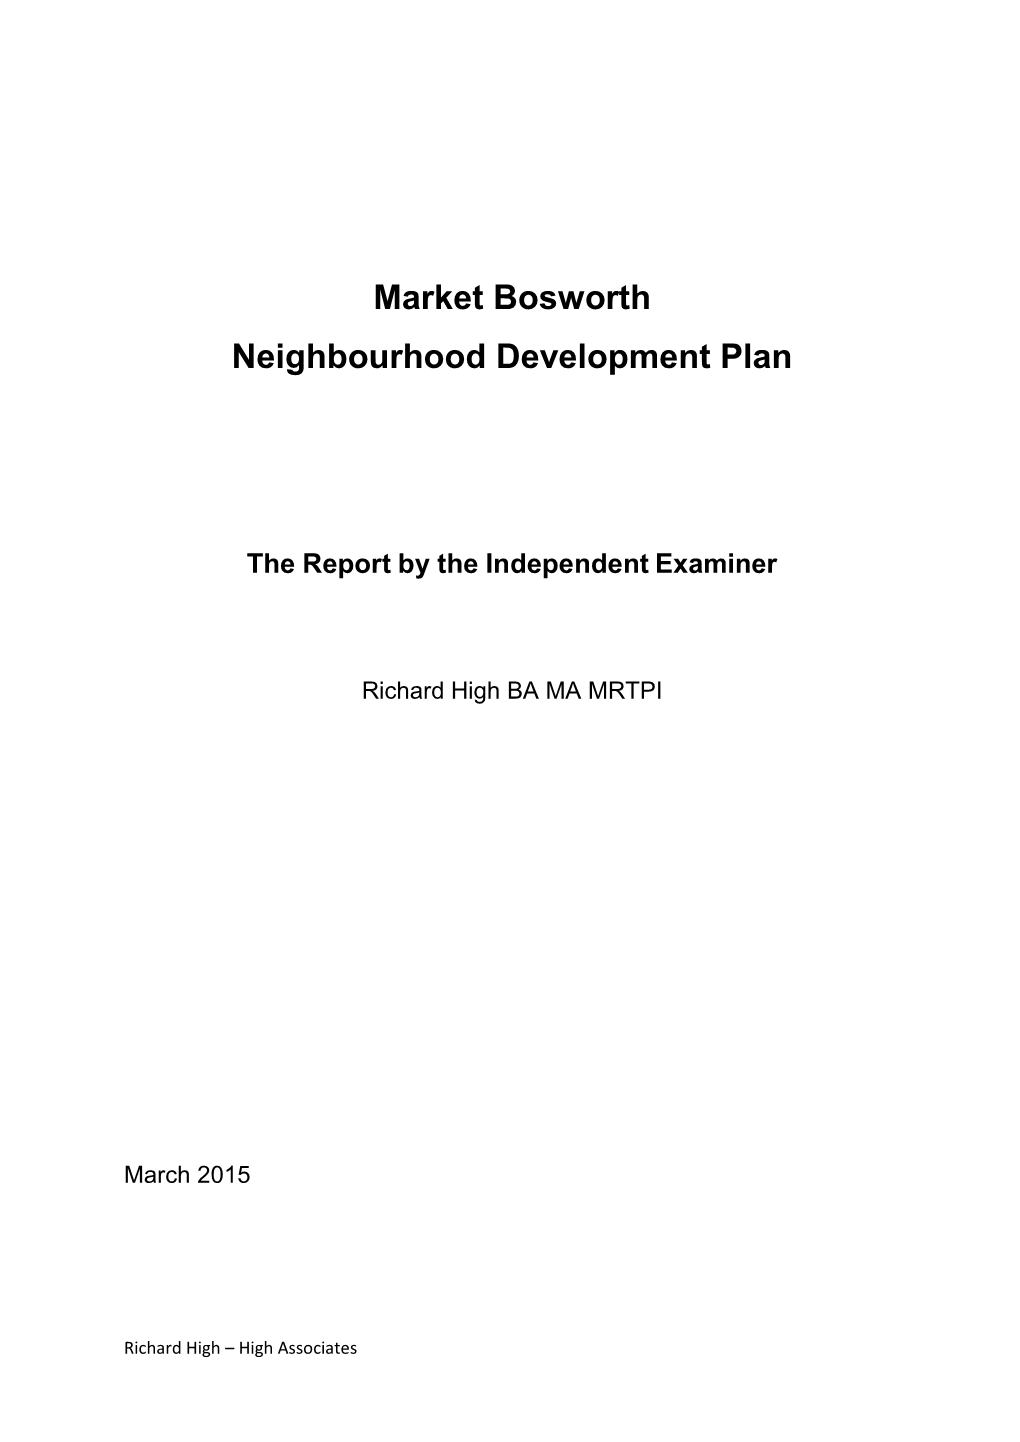 Market Bosworth Neighbourhood Development Plan As Modified by My Recommendations Should Proceed to a Referendum